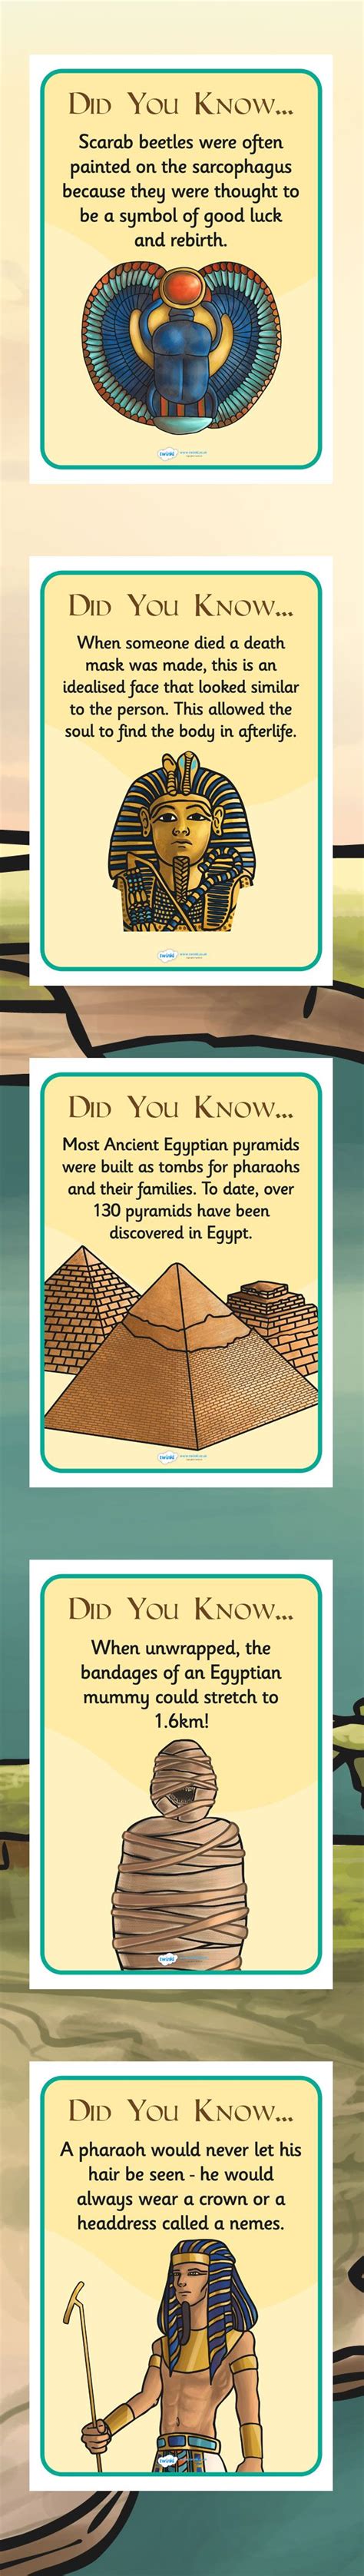 ancient egypt fun facts posters teacher made resources kulturaupice